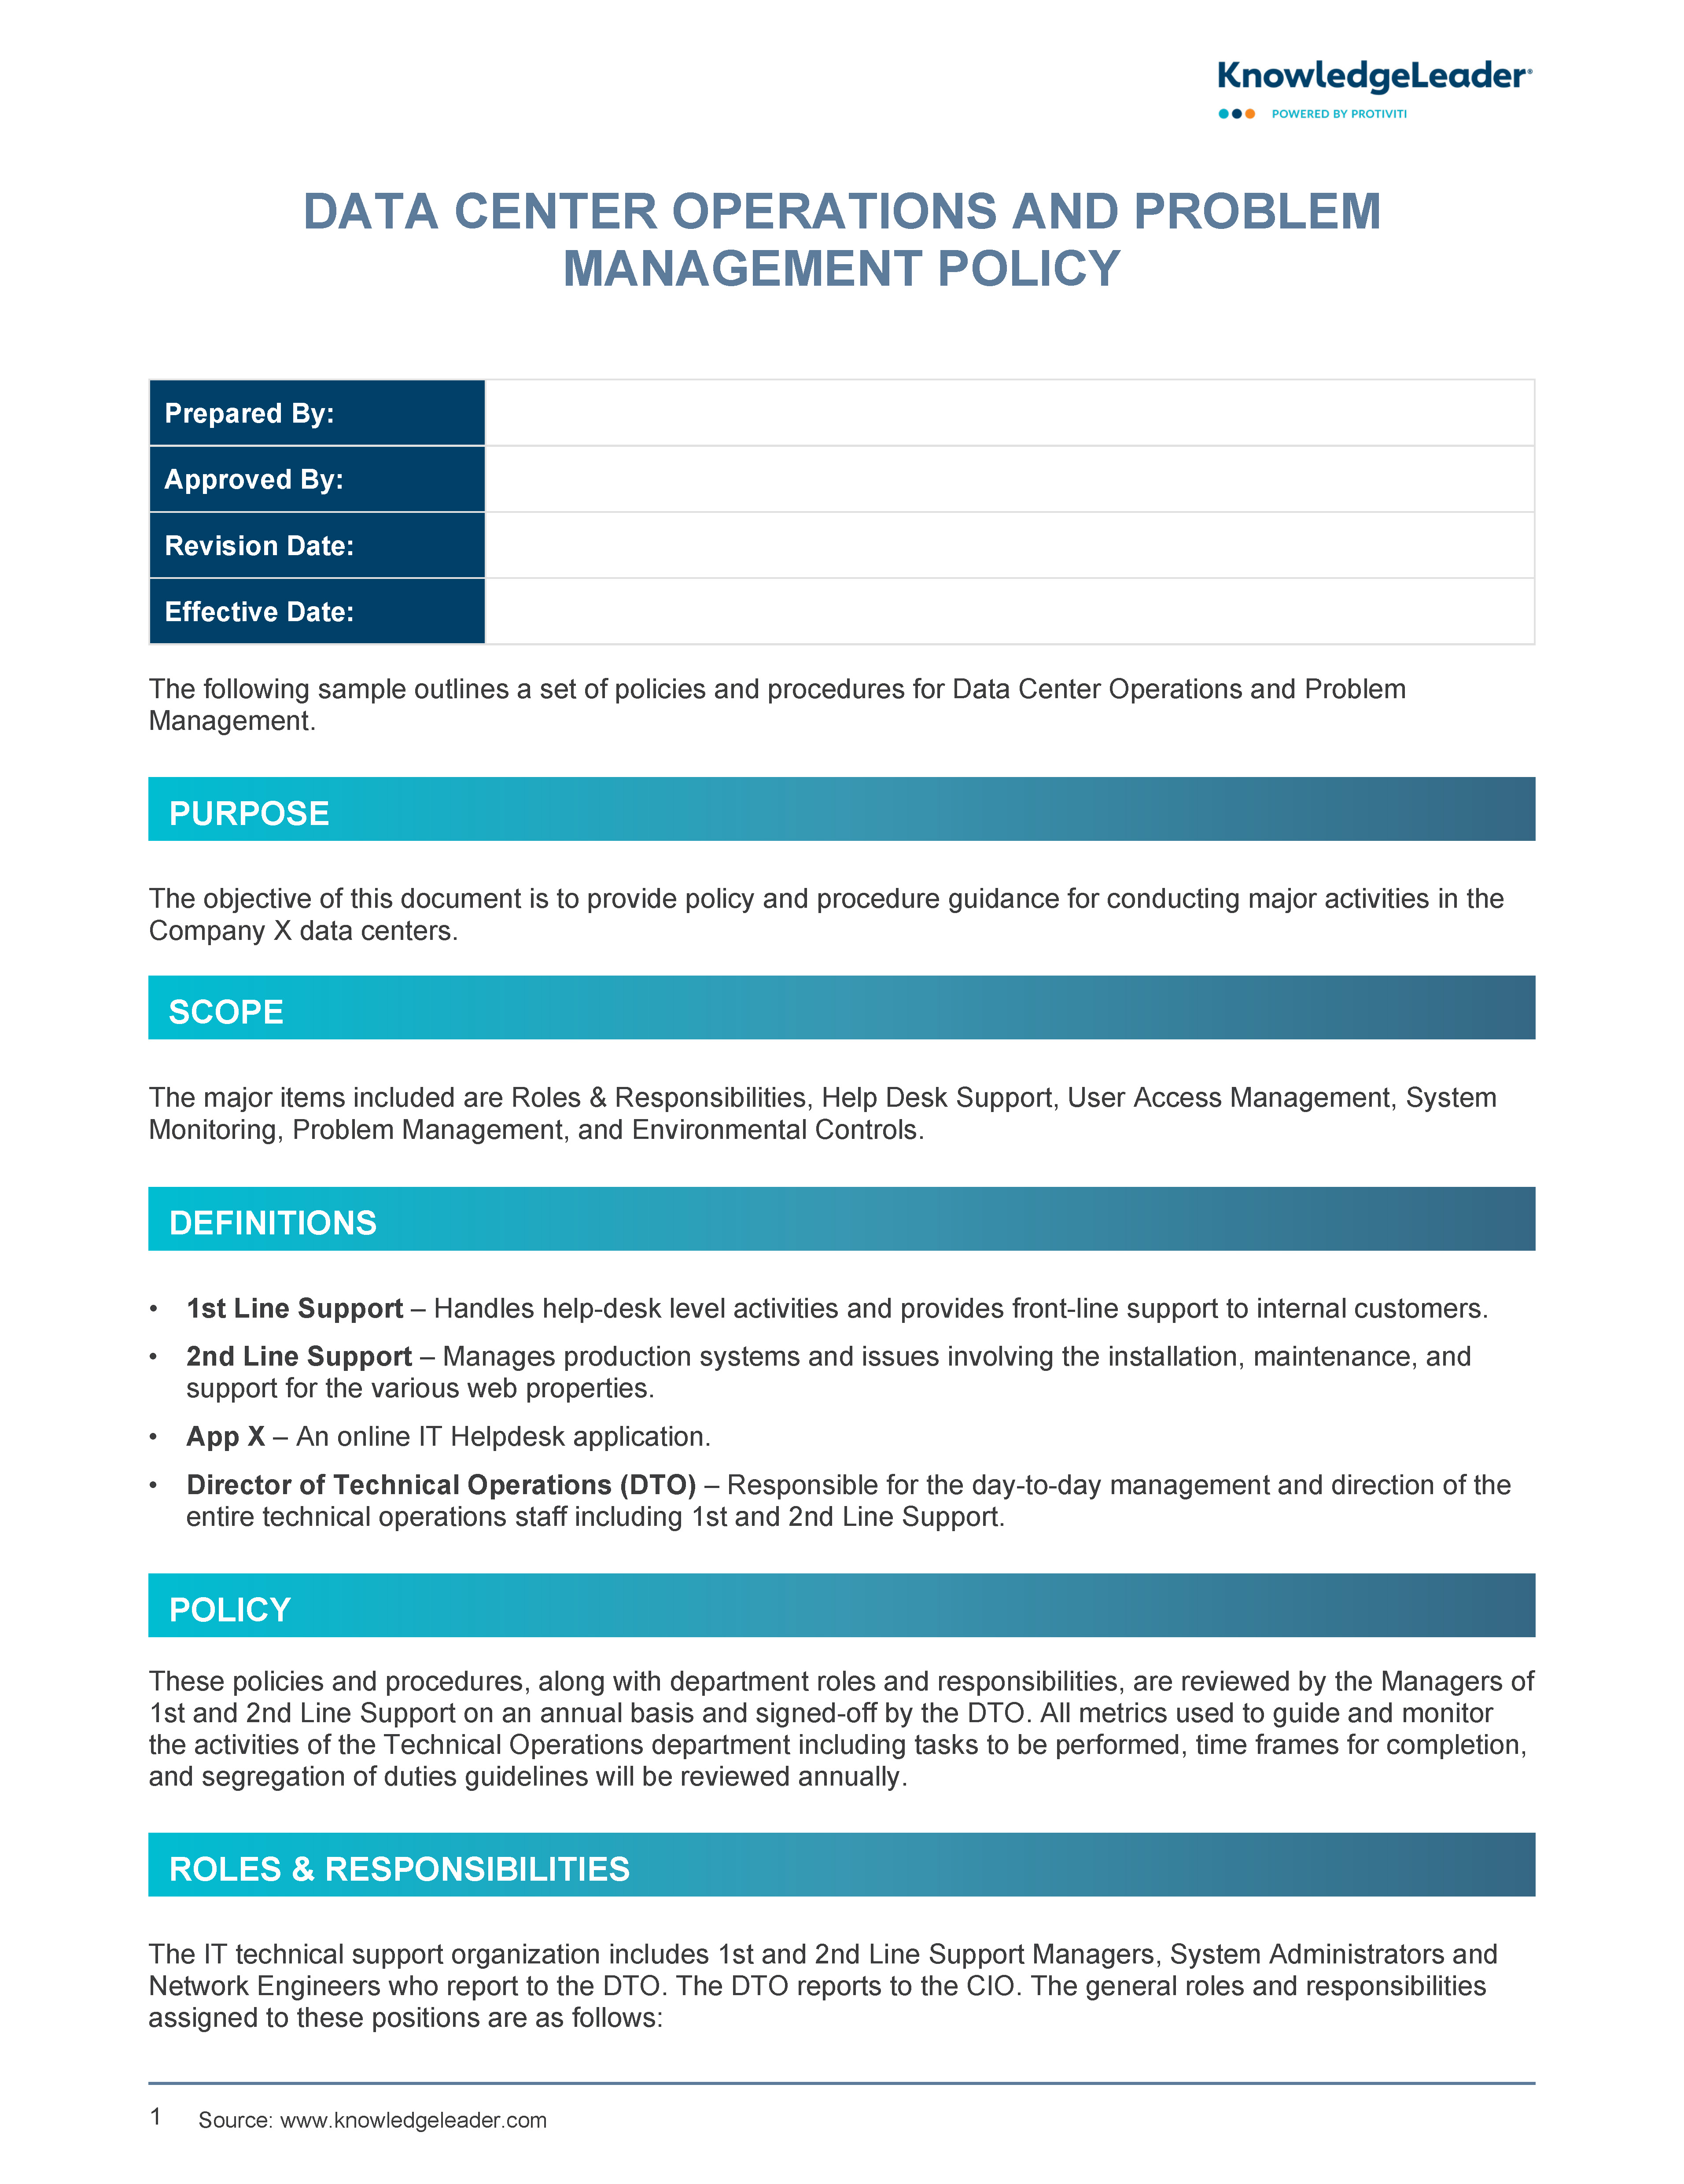 Screenshot of the first page of Data Center Ops and Problem Management Policy